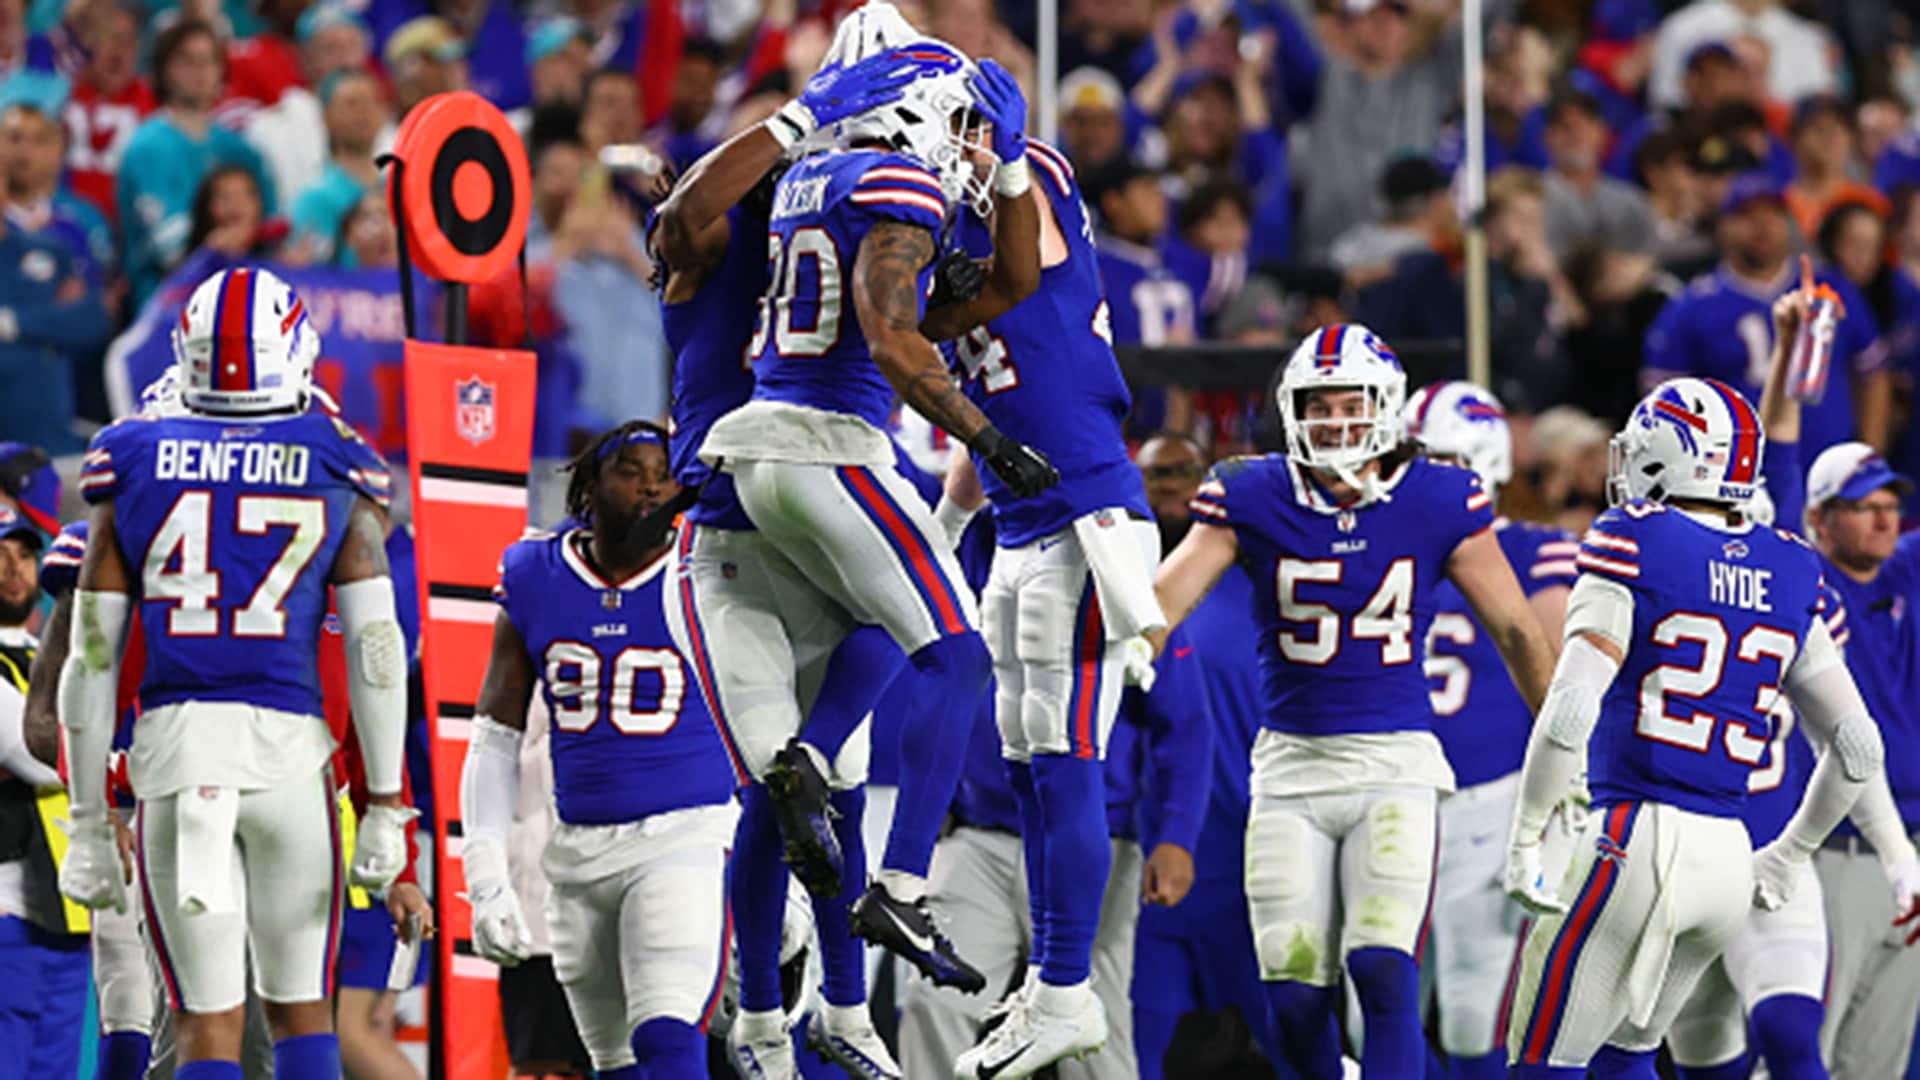 AFC East Champions gear demand high after Bills win division